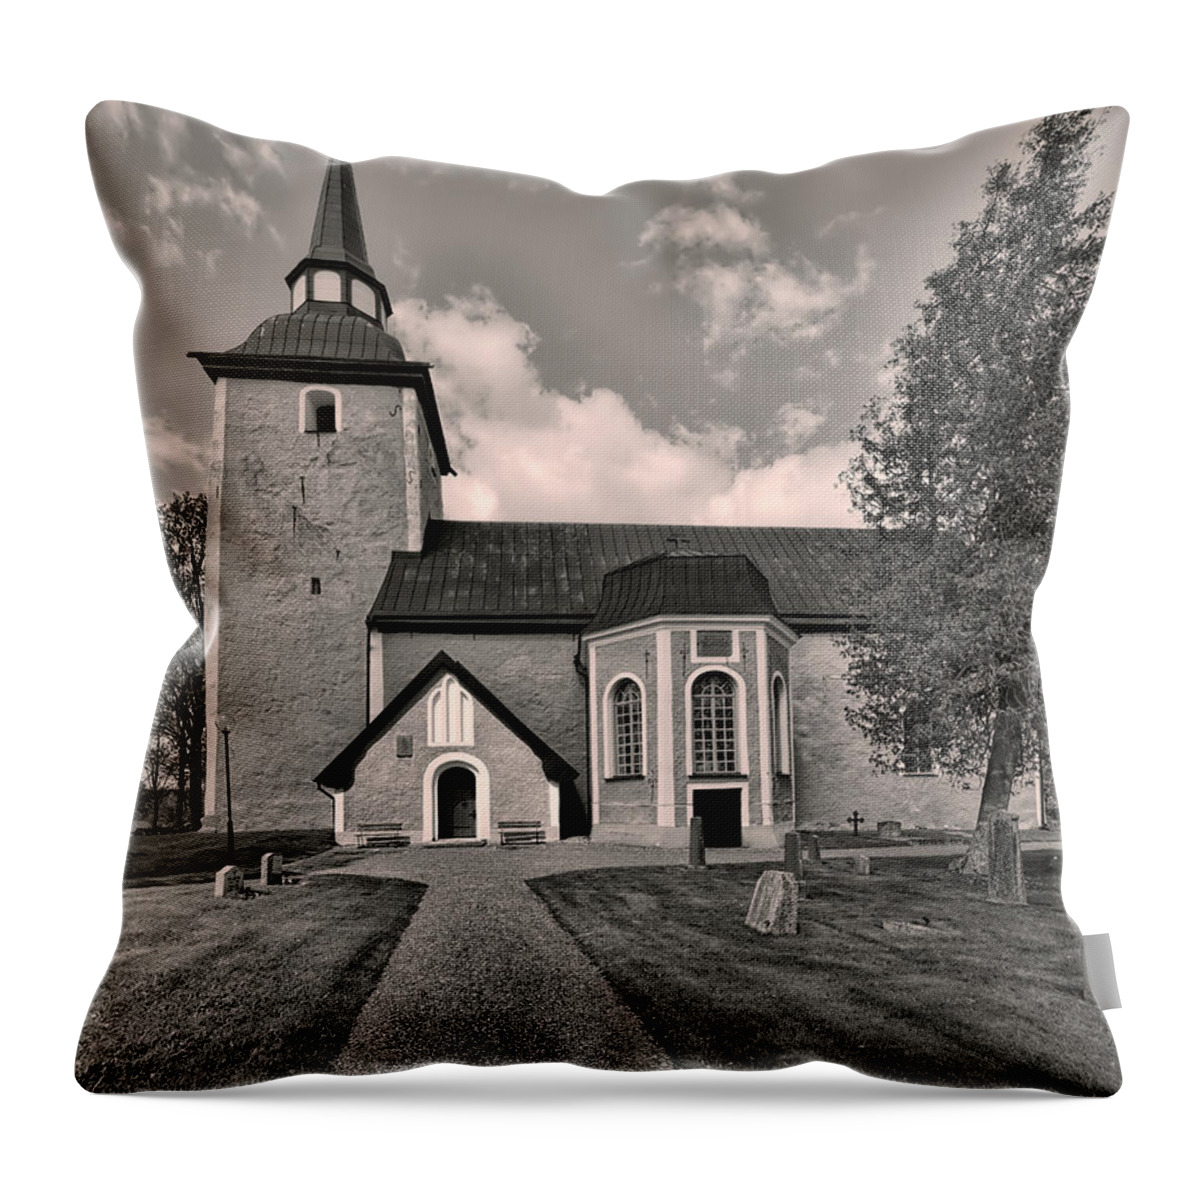 Monochrome Throw Pillow featuring the photograph Monochrome Enkopingsnas Church May by Leif Sohlman